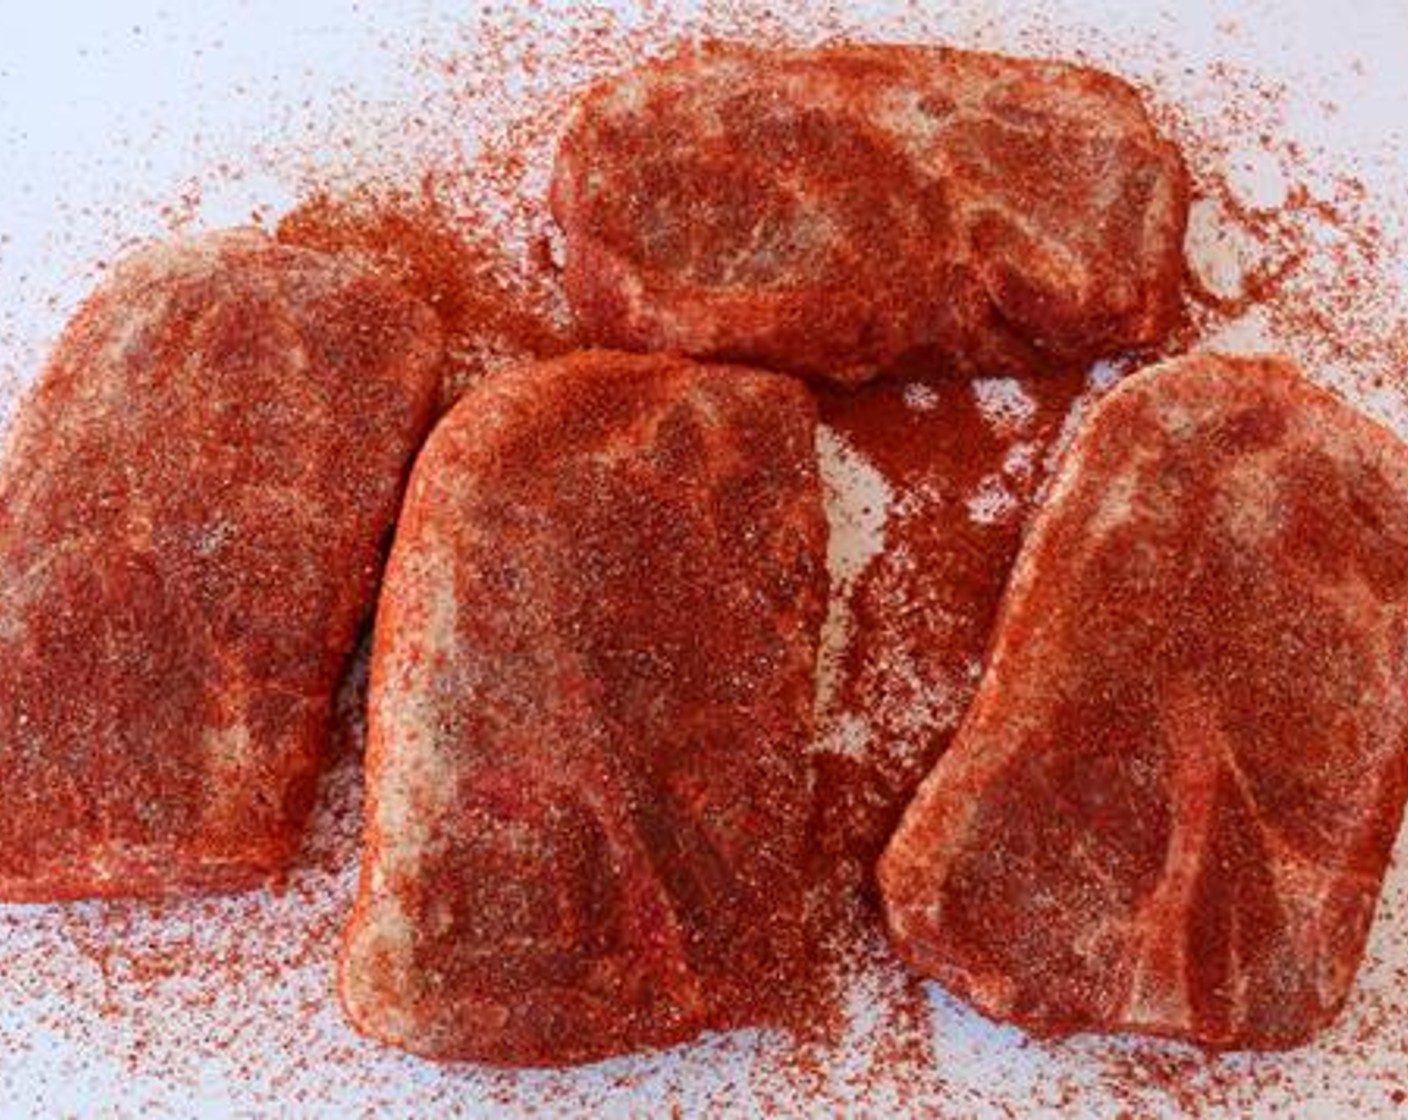 step 2 Season the outside of each Boneless Pork Shoulder (4) with All-Purpose Spice Rub (1/4 cup) followed by Barbecue Rub (1/4 cup). Substitute your favorite seasonings if you wish. Pork shoulder should be around 1 1/4-inch thick.